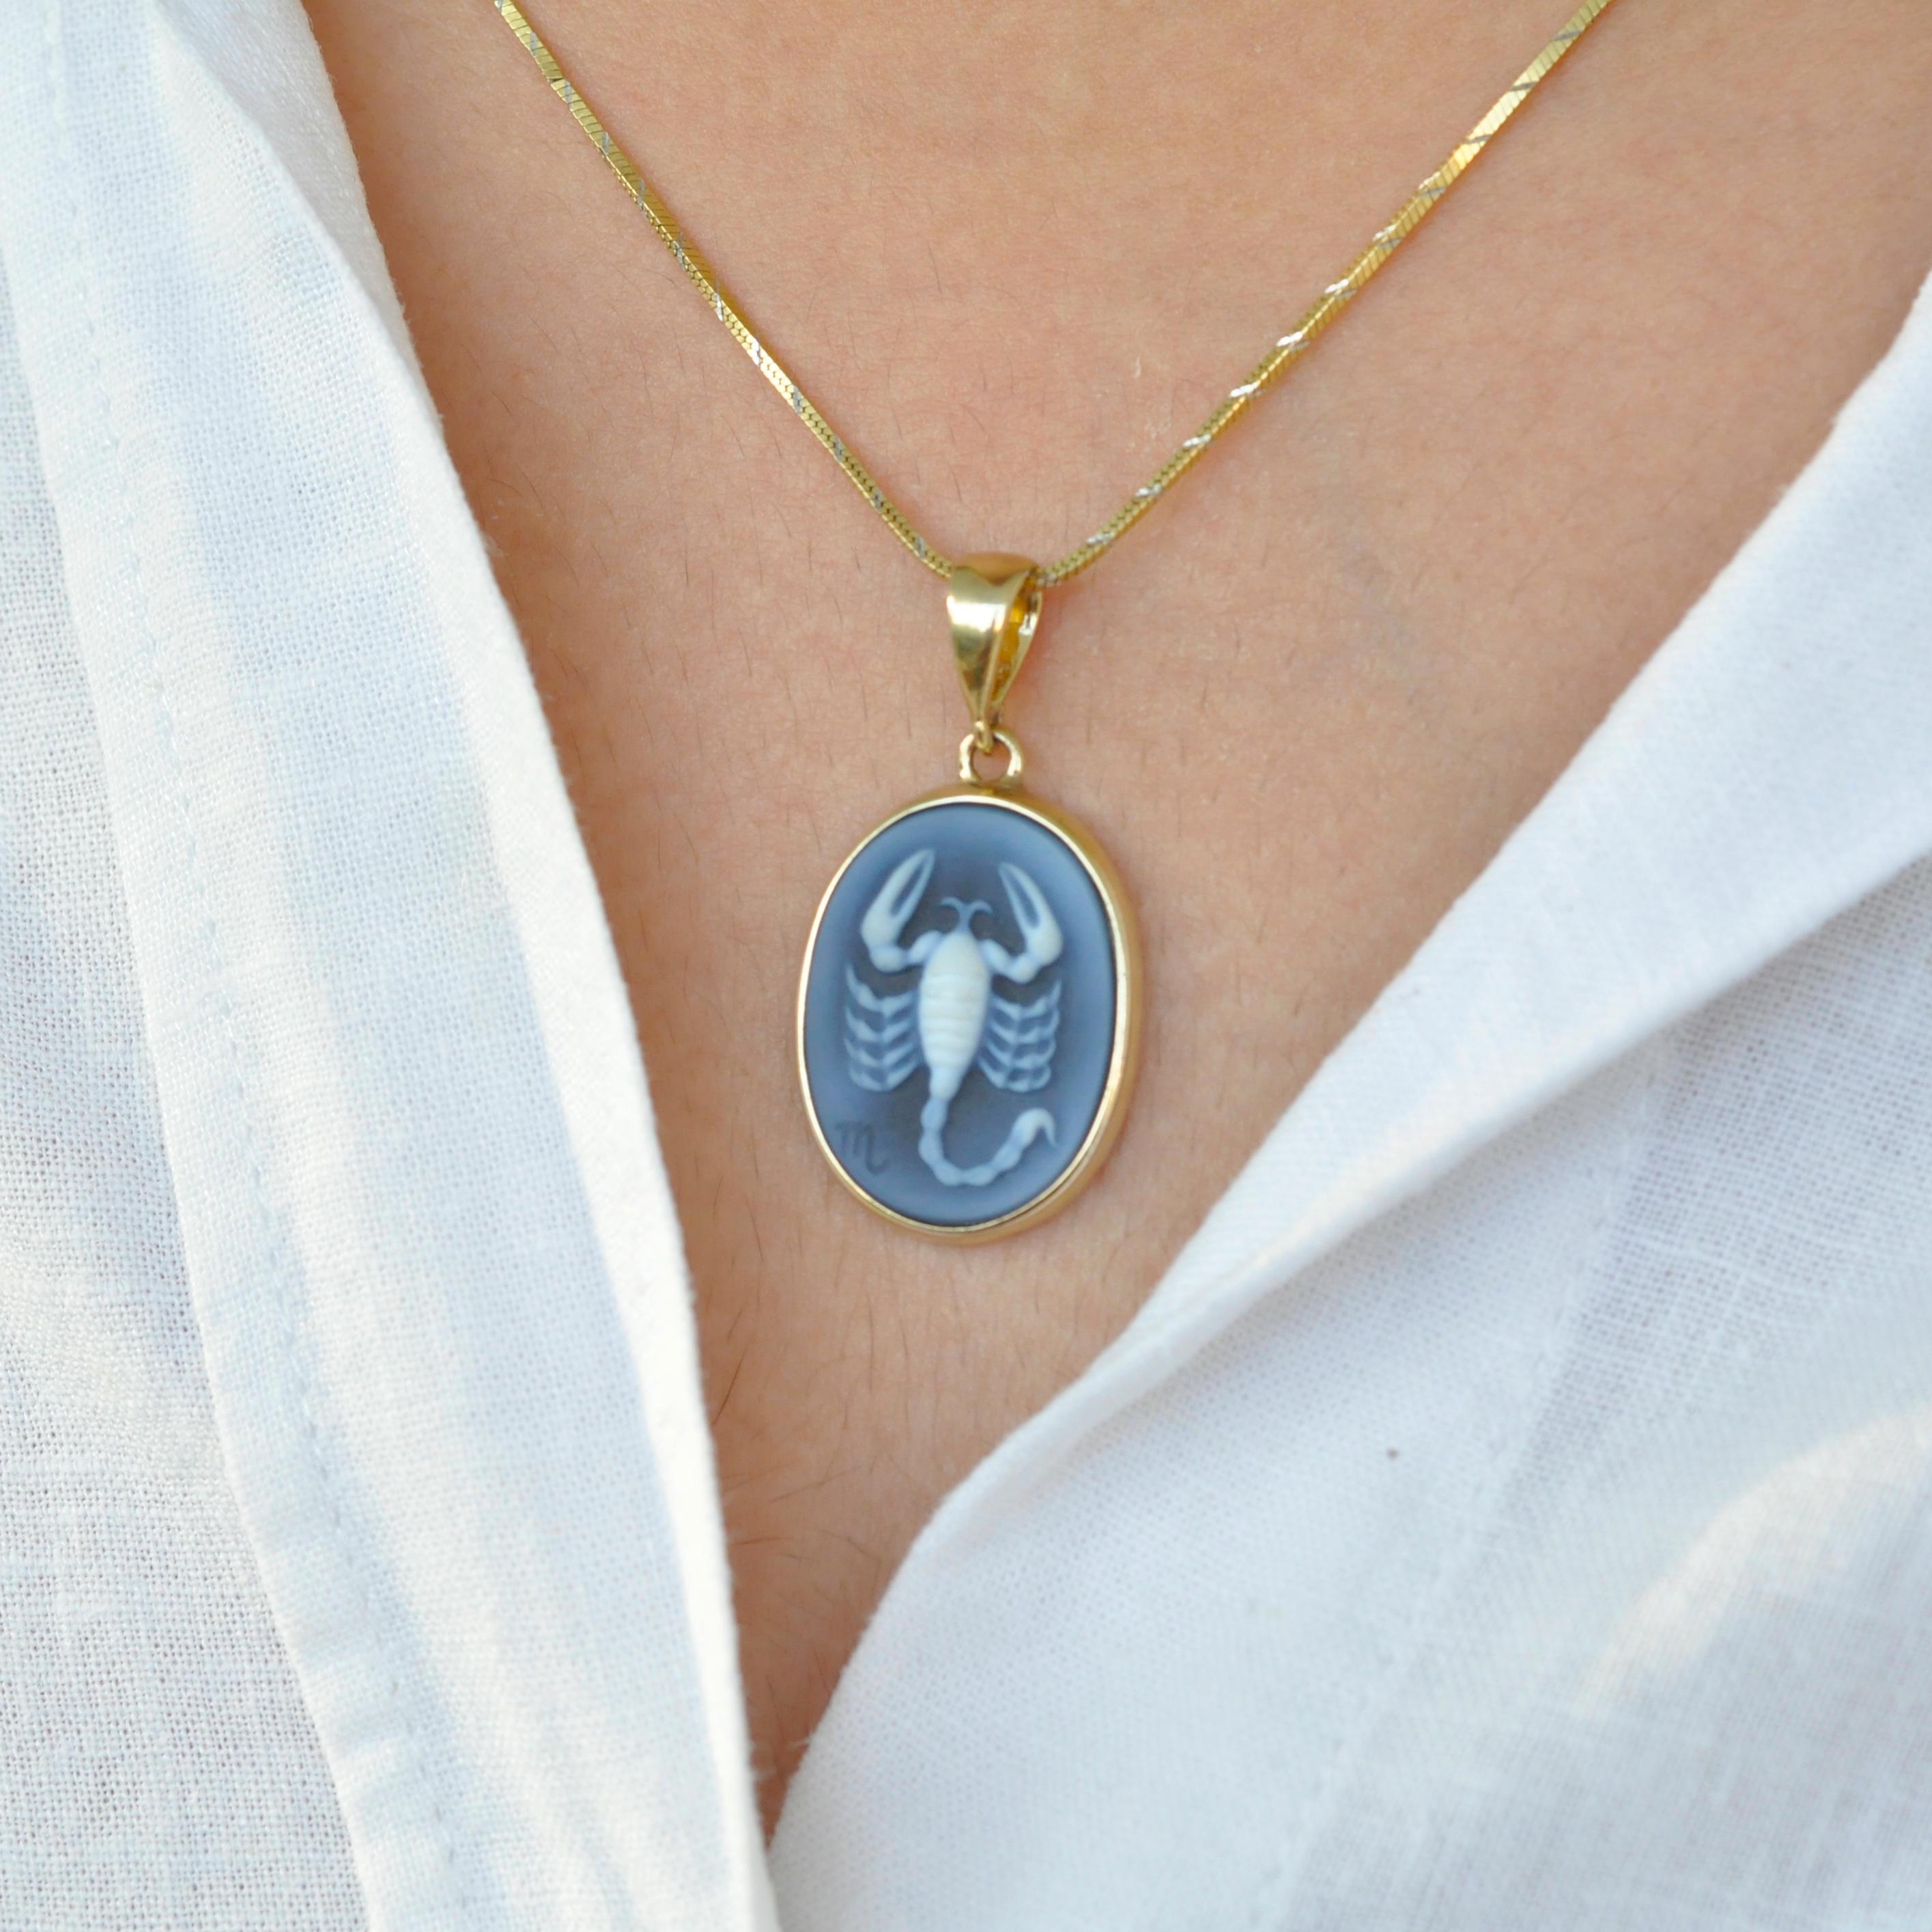 Introducing our captivating Scorpio Zodiac Carving Cameo Pendant Necklace from the Zodiac Collection. This necklace features a stunning cameo meticulously crafted by an expert cameo engraver in Germany. The cameo is skillfully engraved on a relief